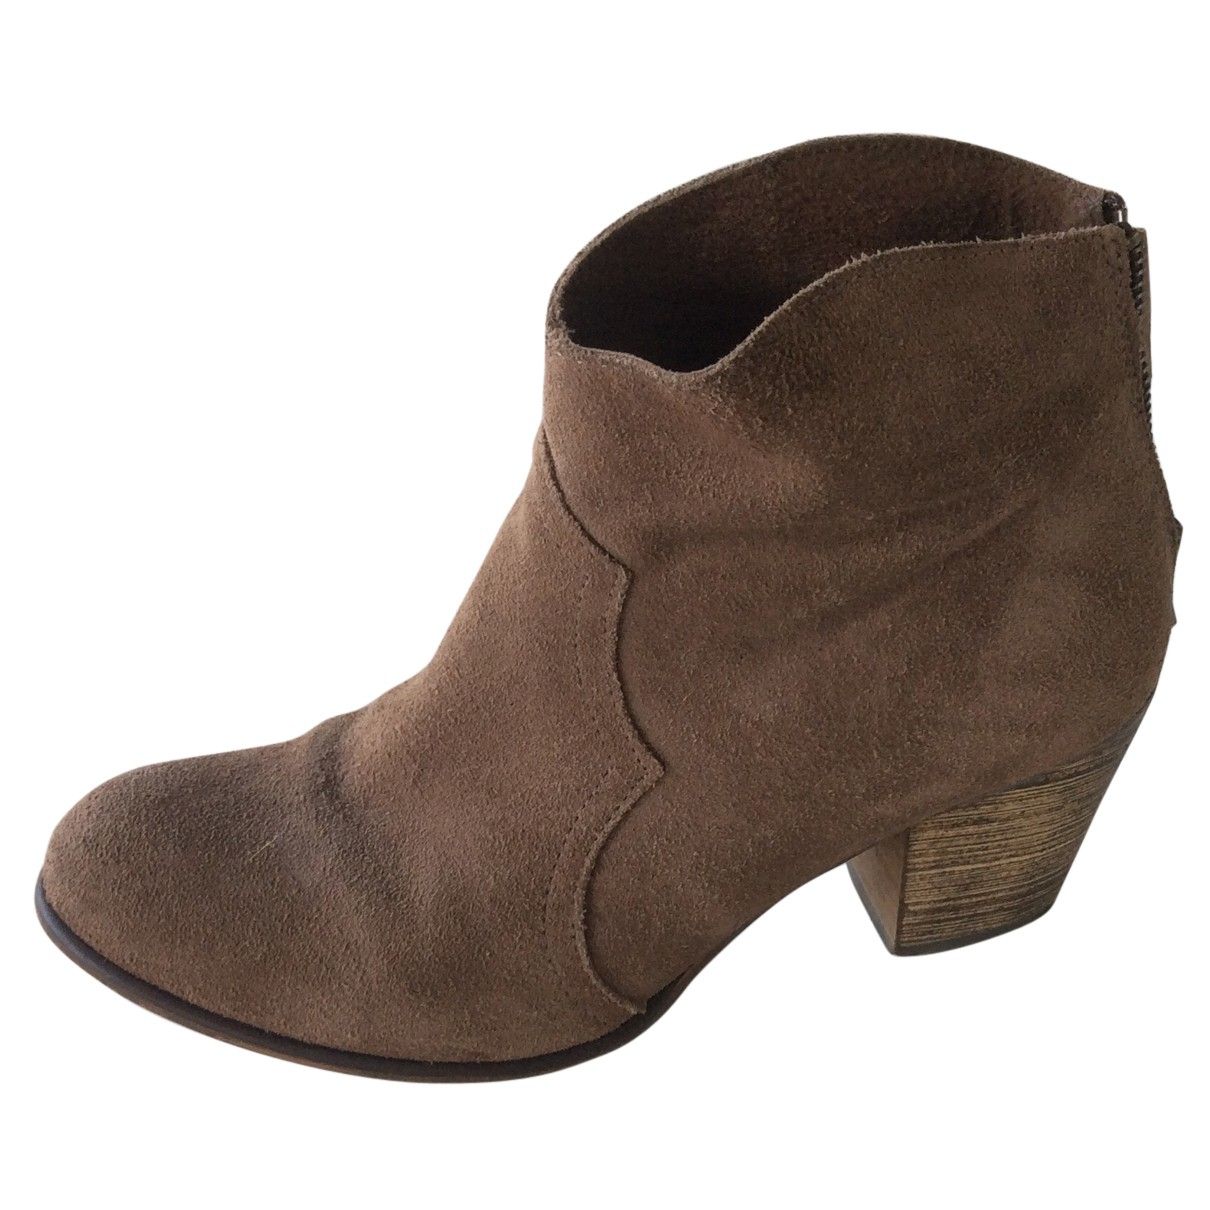 Ankle boots Office London Brown size 40 EU in Suede - 3055929